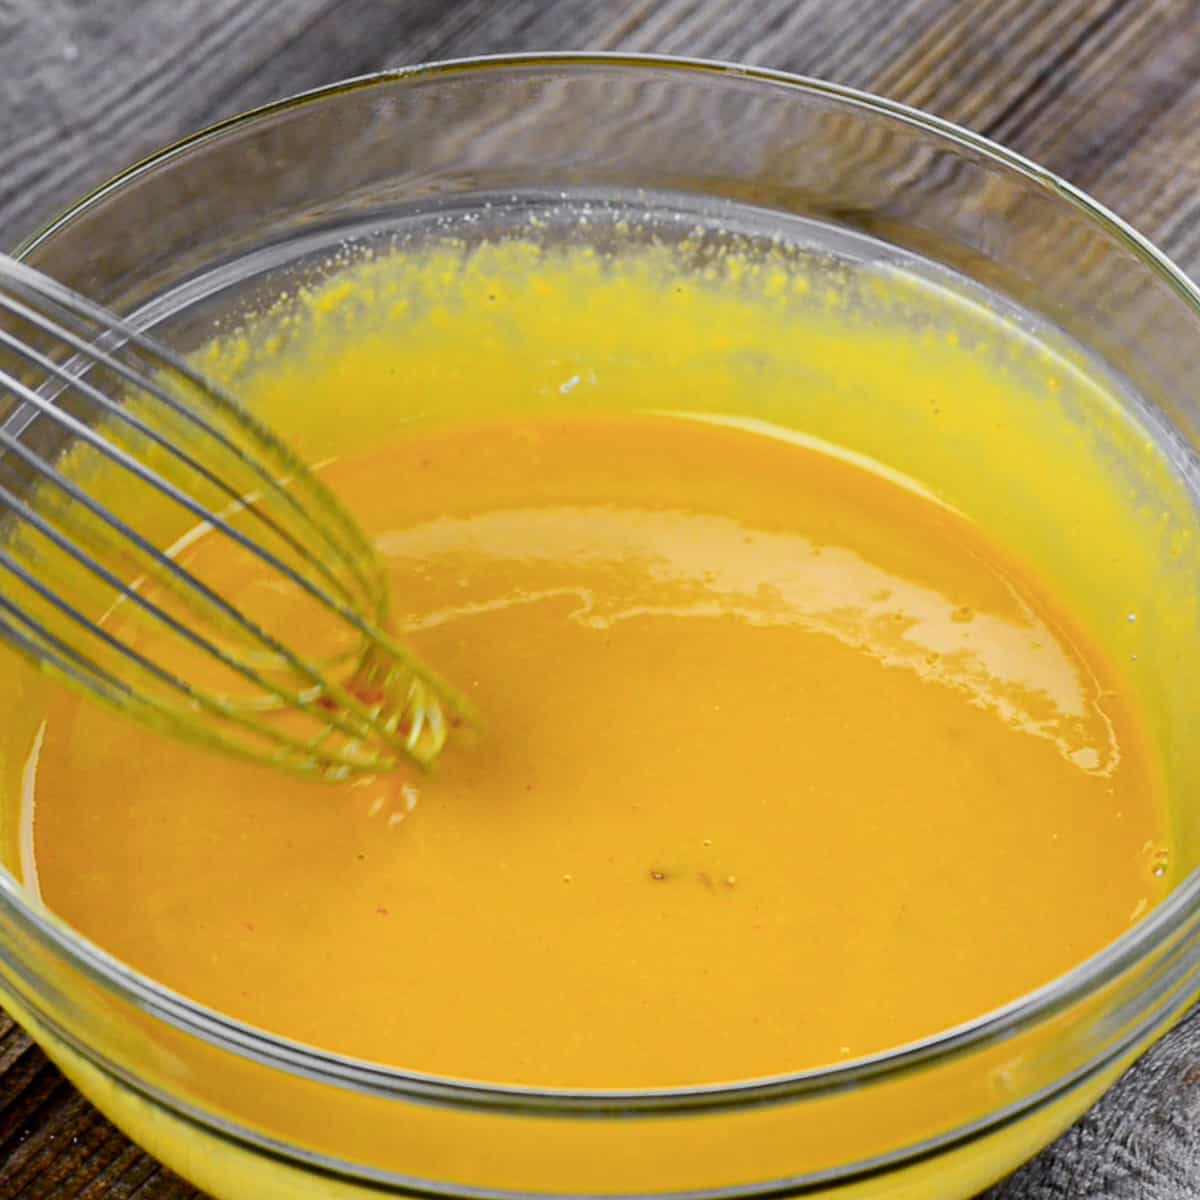 Mixing Carolina mustard bbq sauce with whisk in glass bowl.